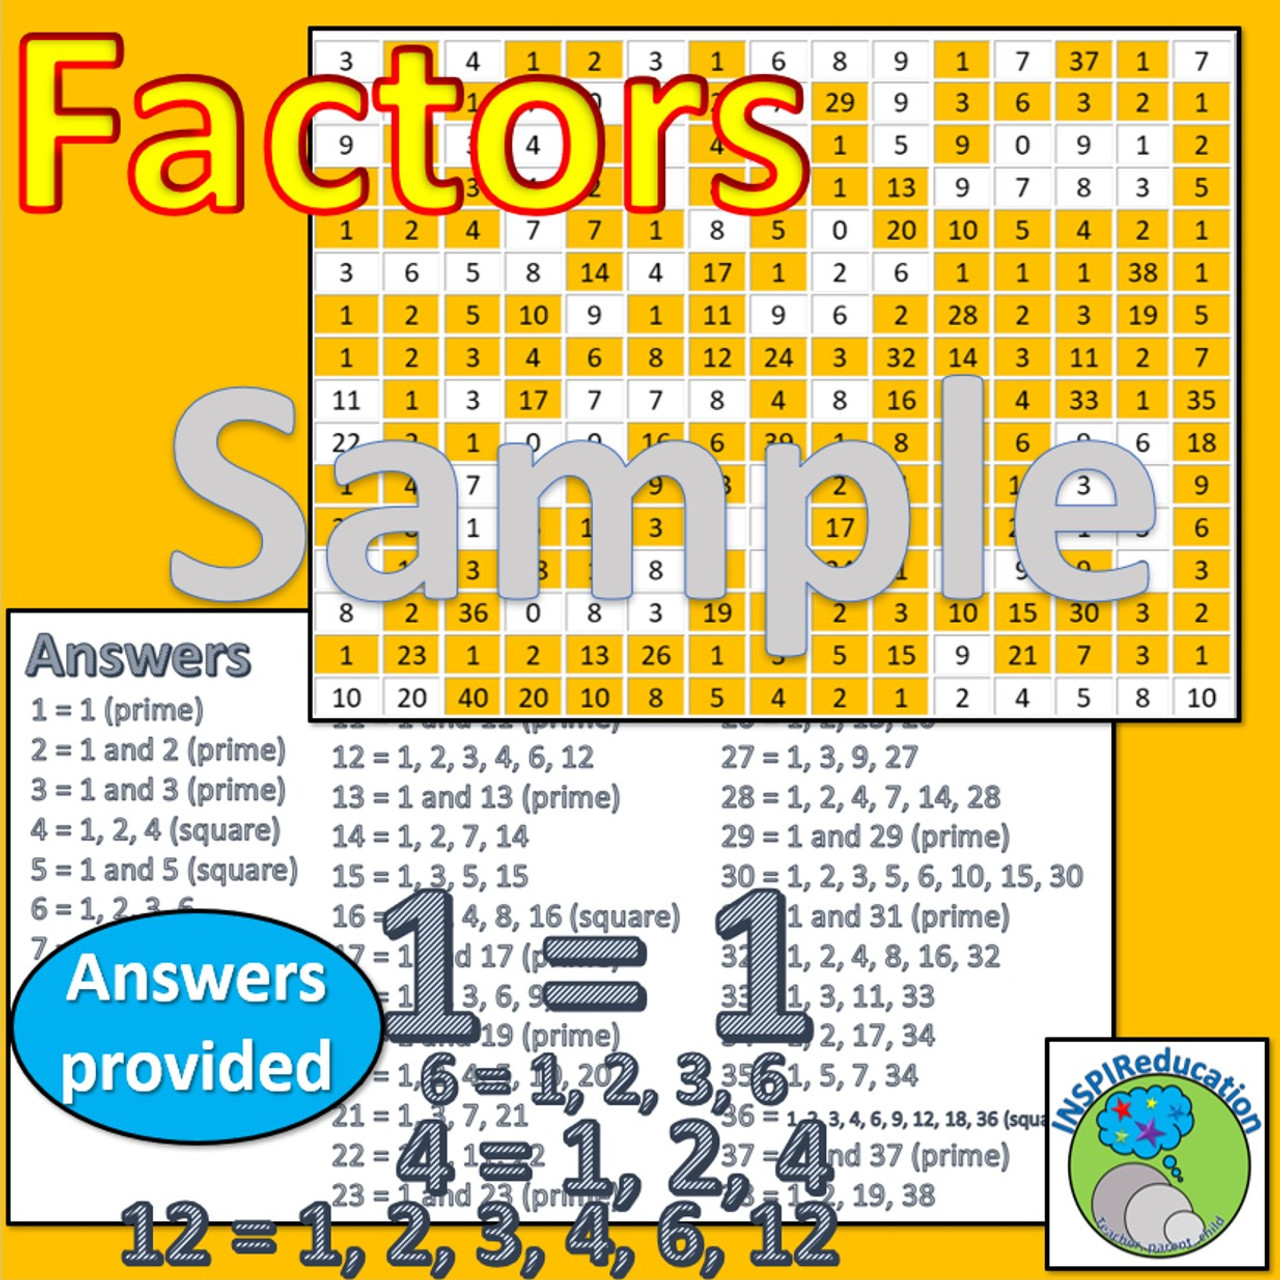 Factors in numbers 1 - 40: Number search. Solve the problems to find the factors